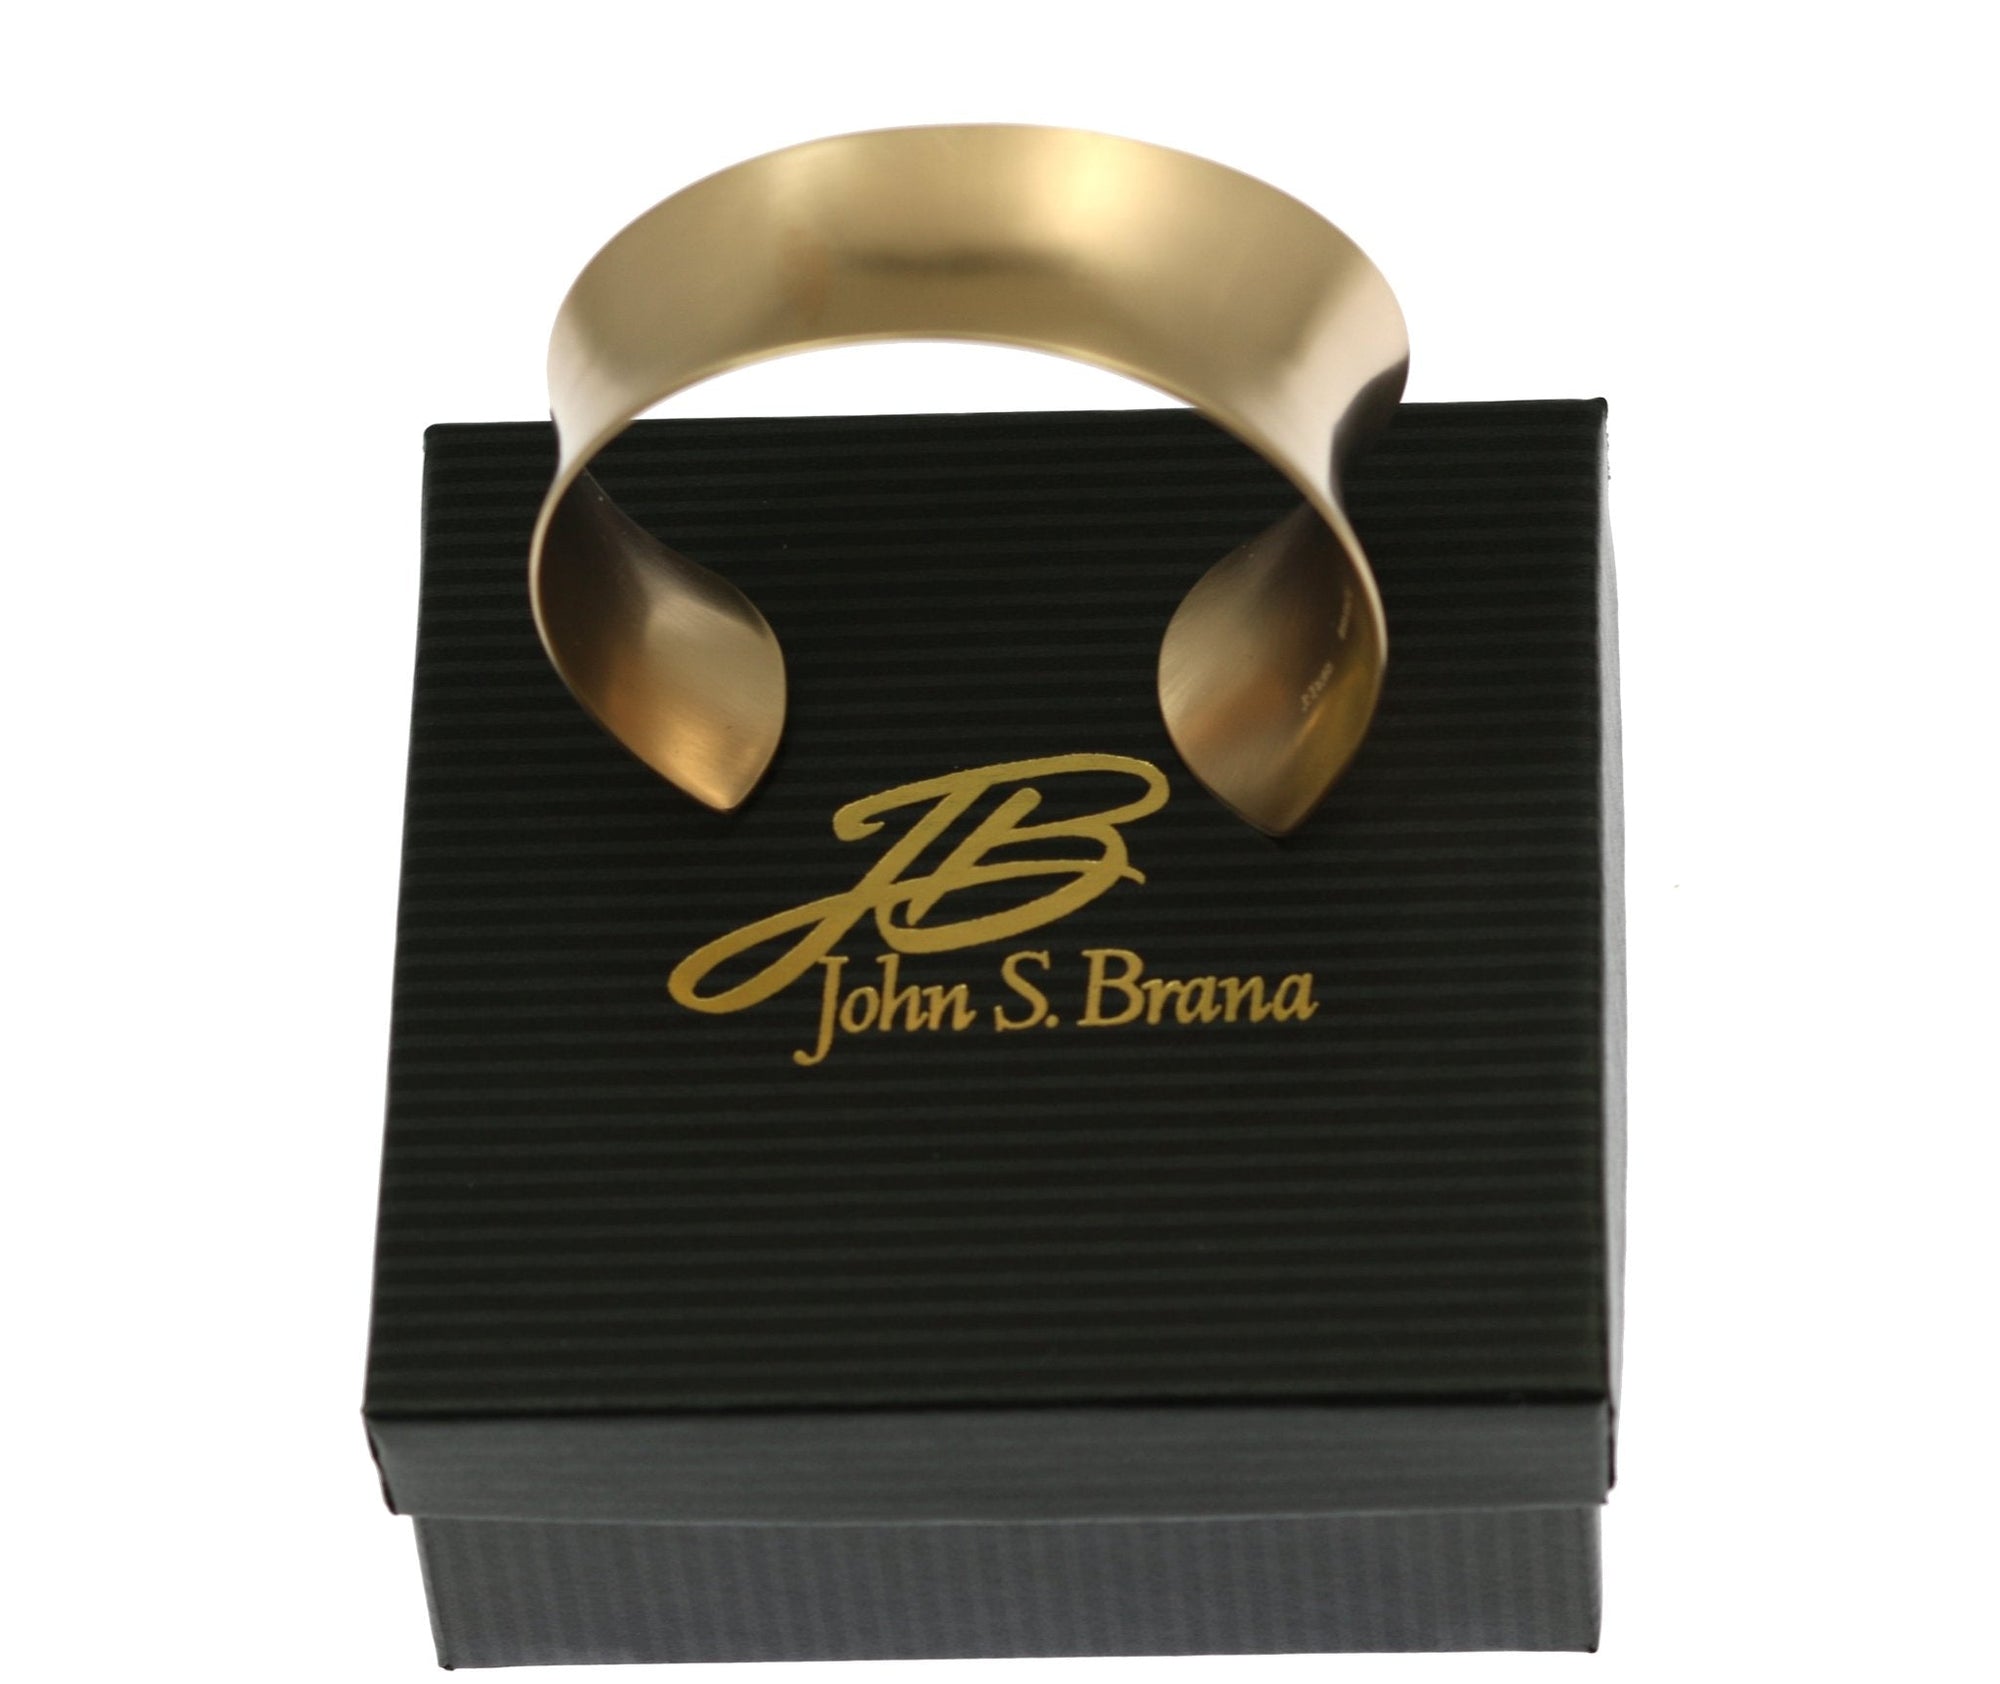 Tapered Brushed Bronze Anticlastic Cuff on Branded Box